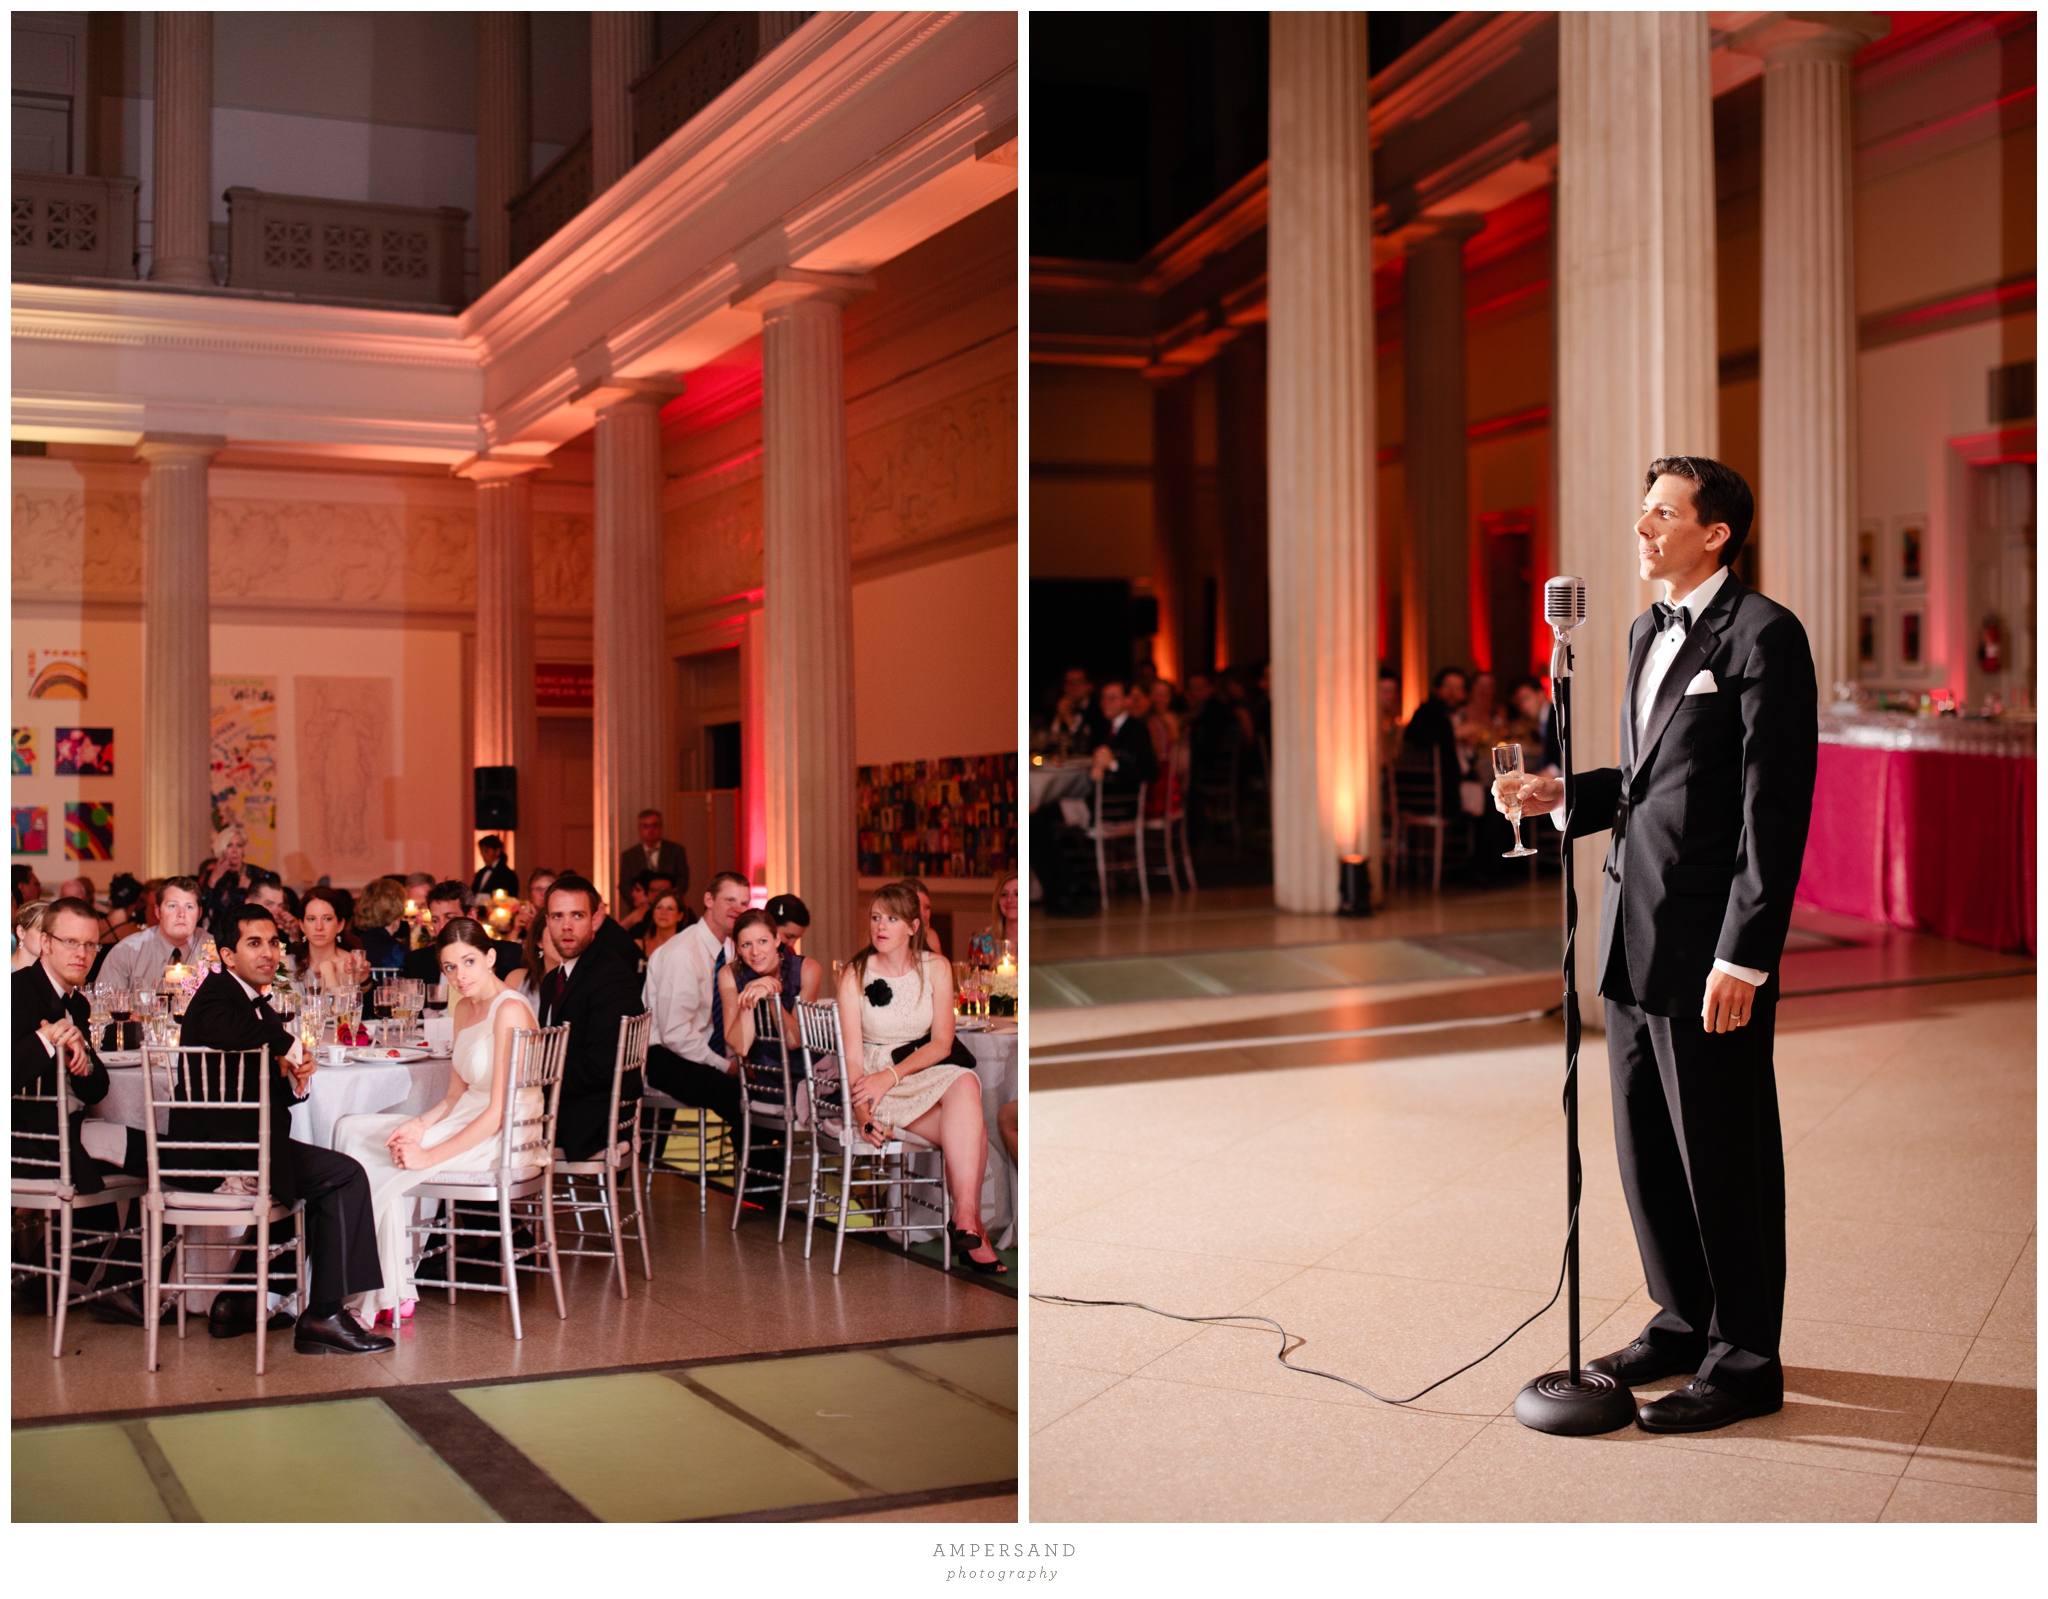 Wedding Reception Corcoran Gallery of Art  // Photos by Ampersand Photography